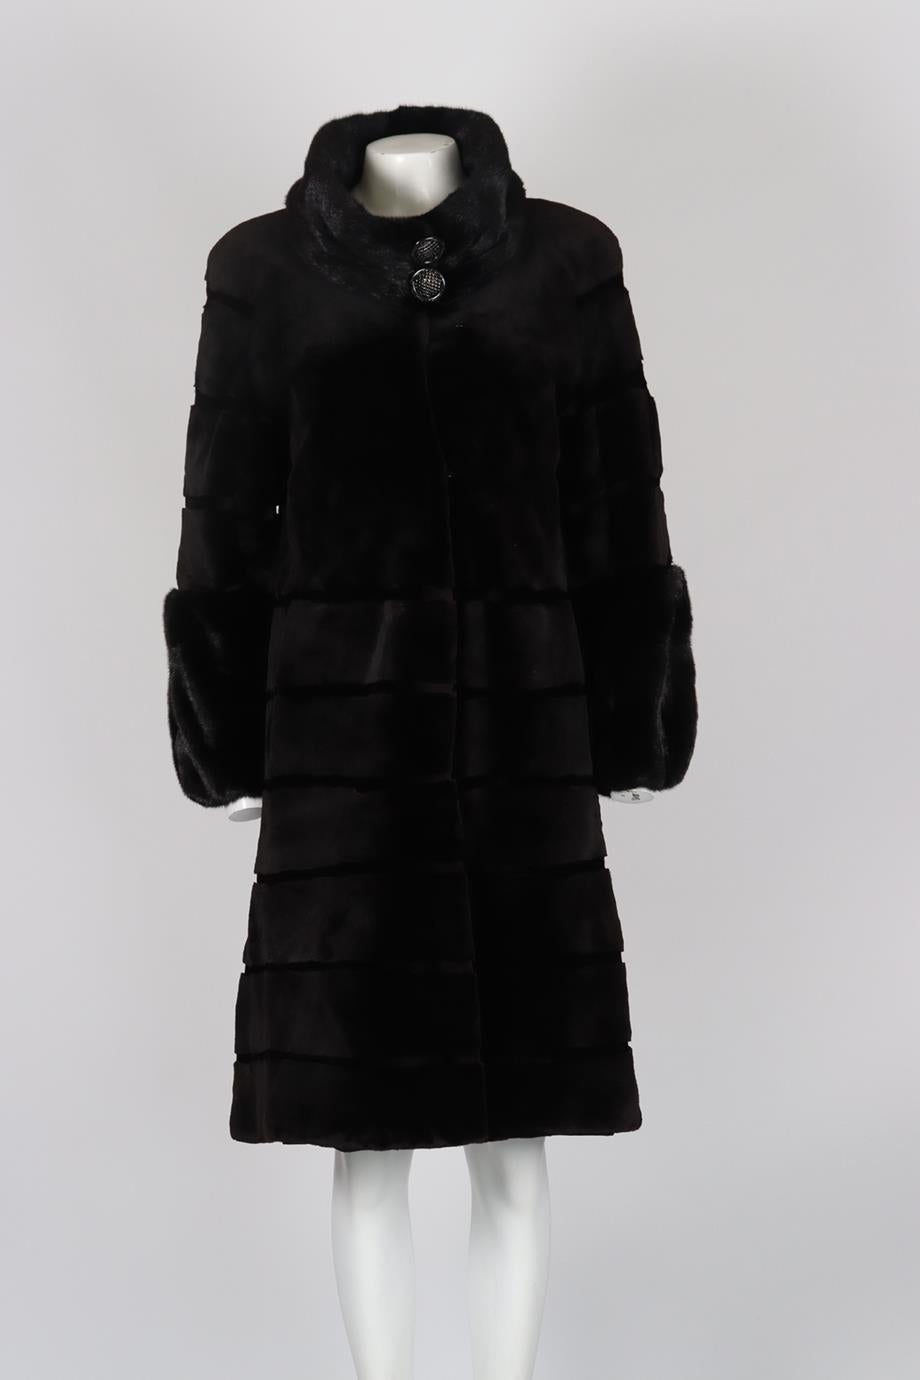 Cisodono Mink Fur Coat. Black. Long Sleeve. Turtleneck. Hook and eye fastening - Front. No composition label. IT 40 (UK 8, US 4, FR 36). Shoulder to shoulder: 19 in. Bust: 40.3 in. Waist: 36.2 in. Hips: 41.1 in. Length: 39.2 in. Condition: Used.